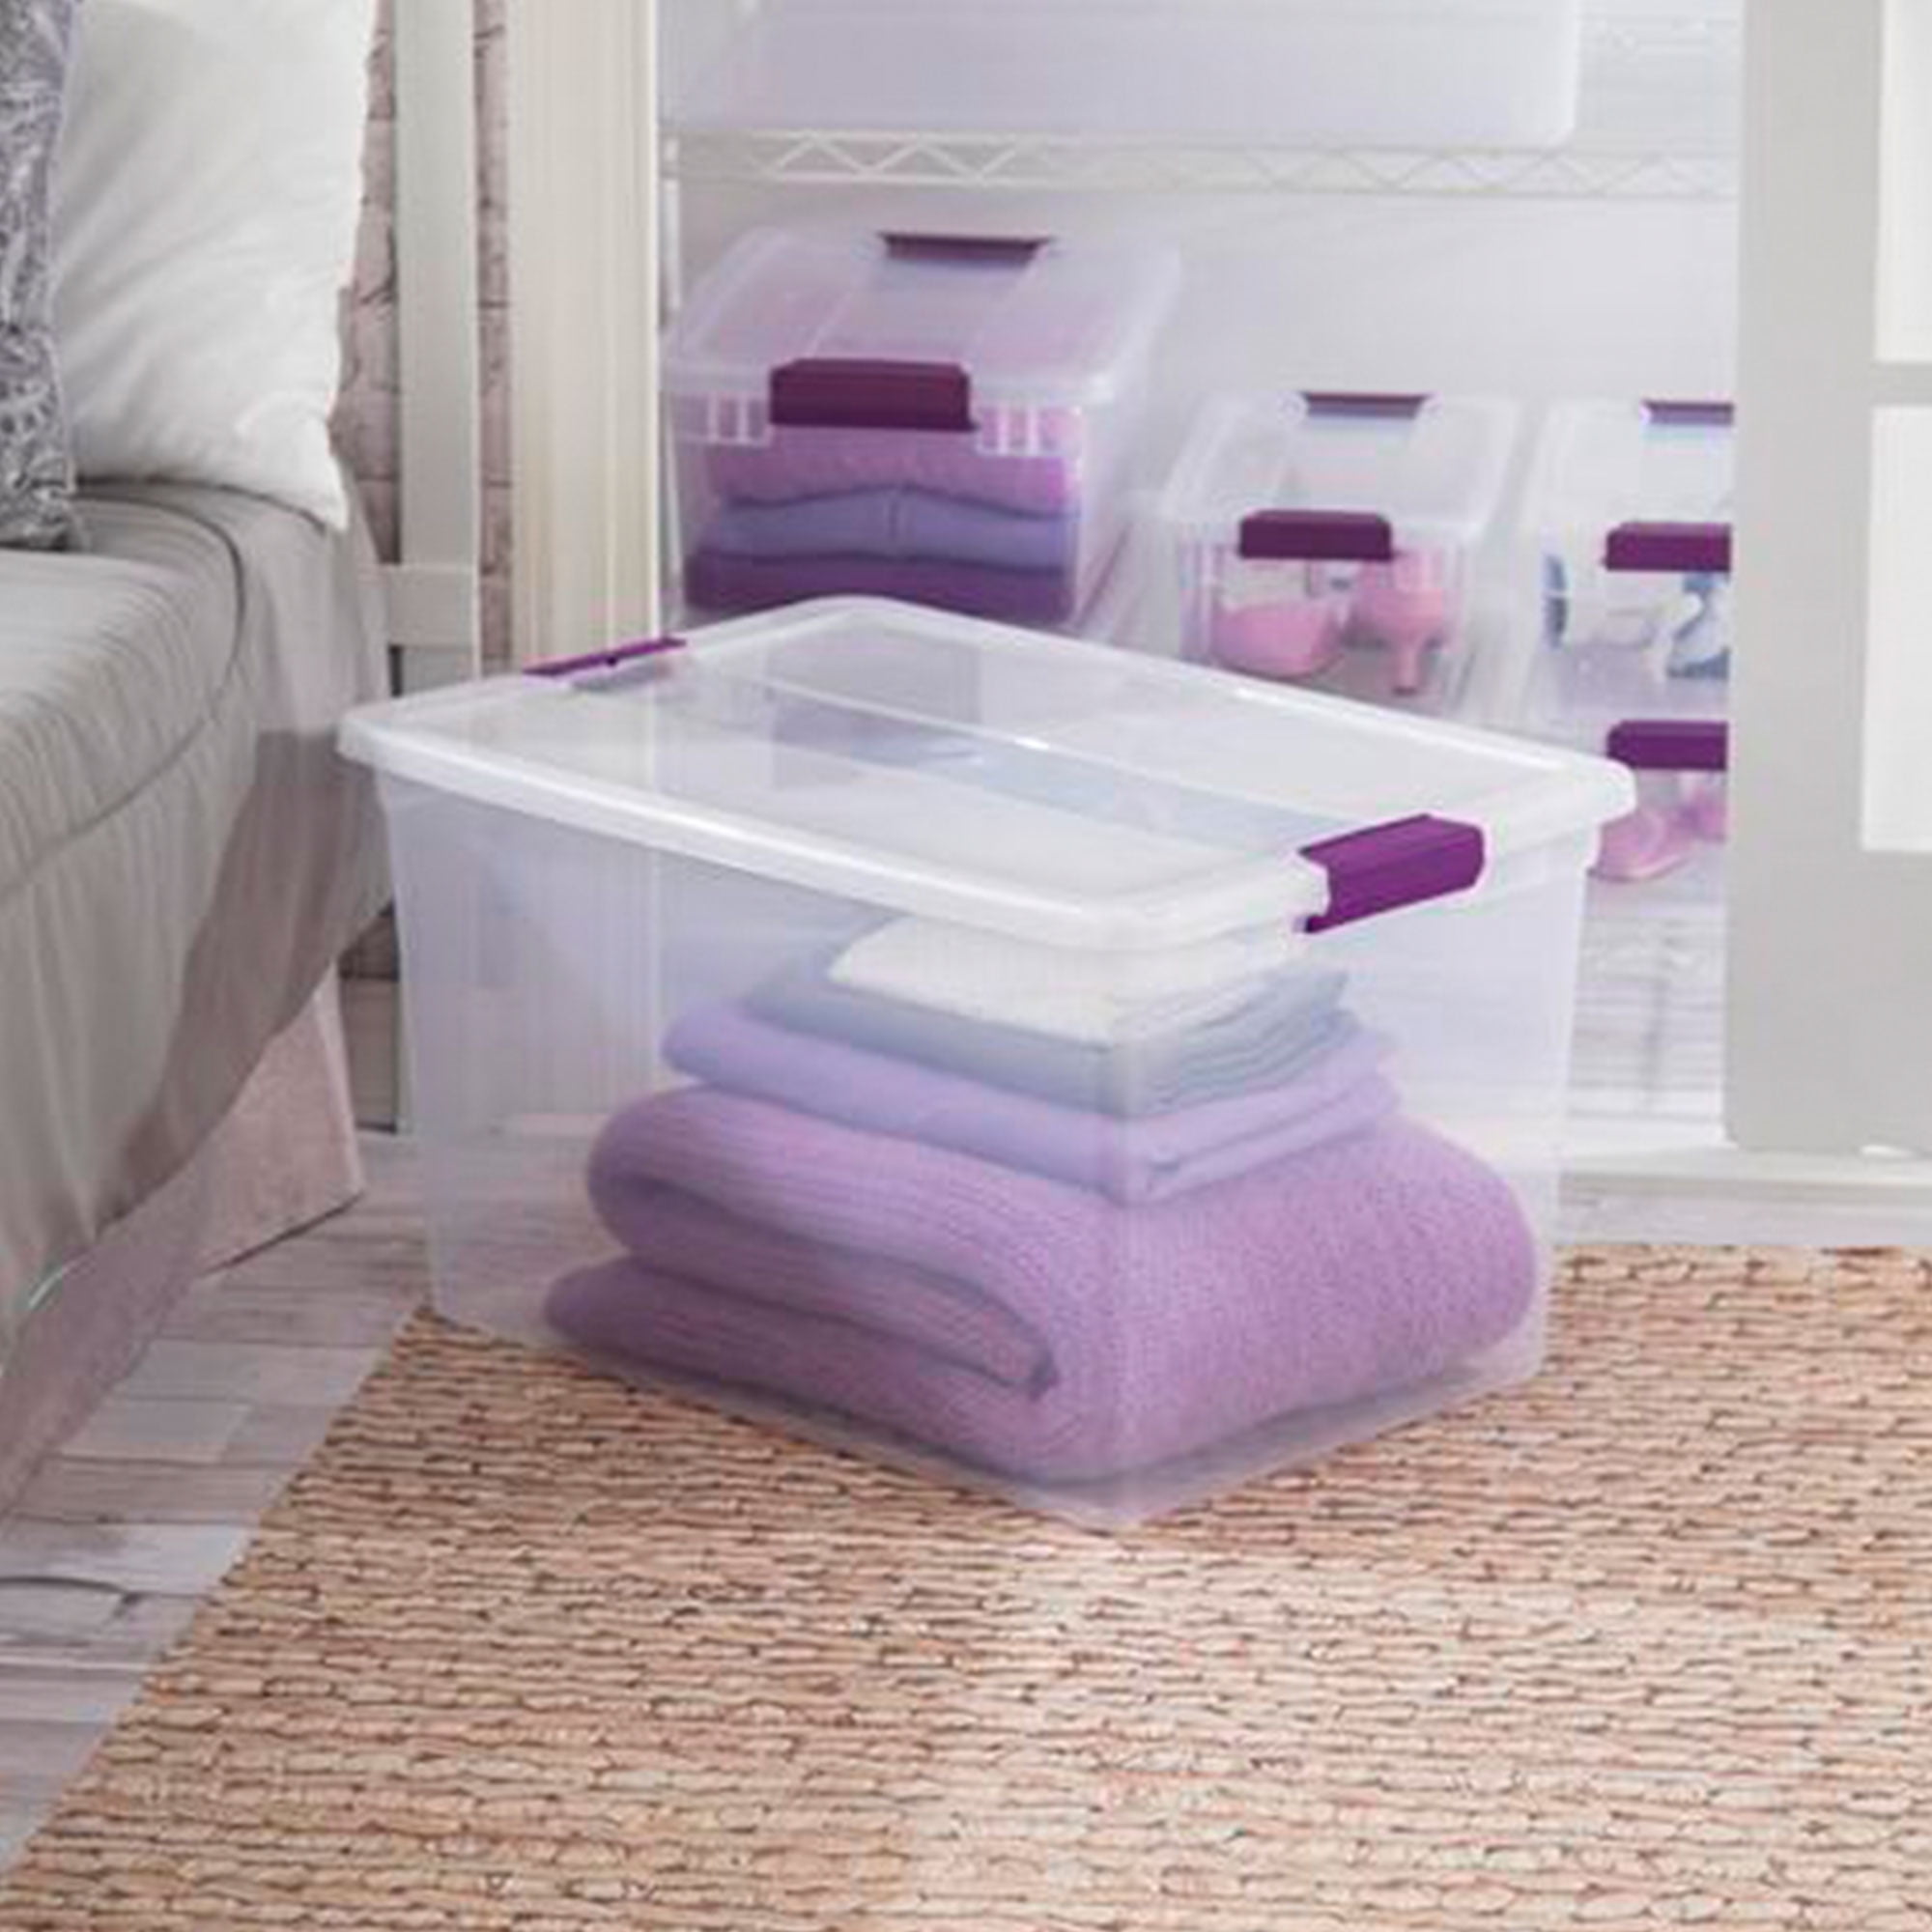 Dropship Set Of 6 Sterilite 66 Quart Latch Box Plastic Storage Tote  Container Organizer to Sell Online at a Lower Price